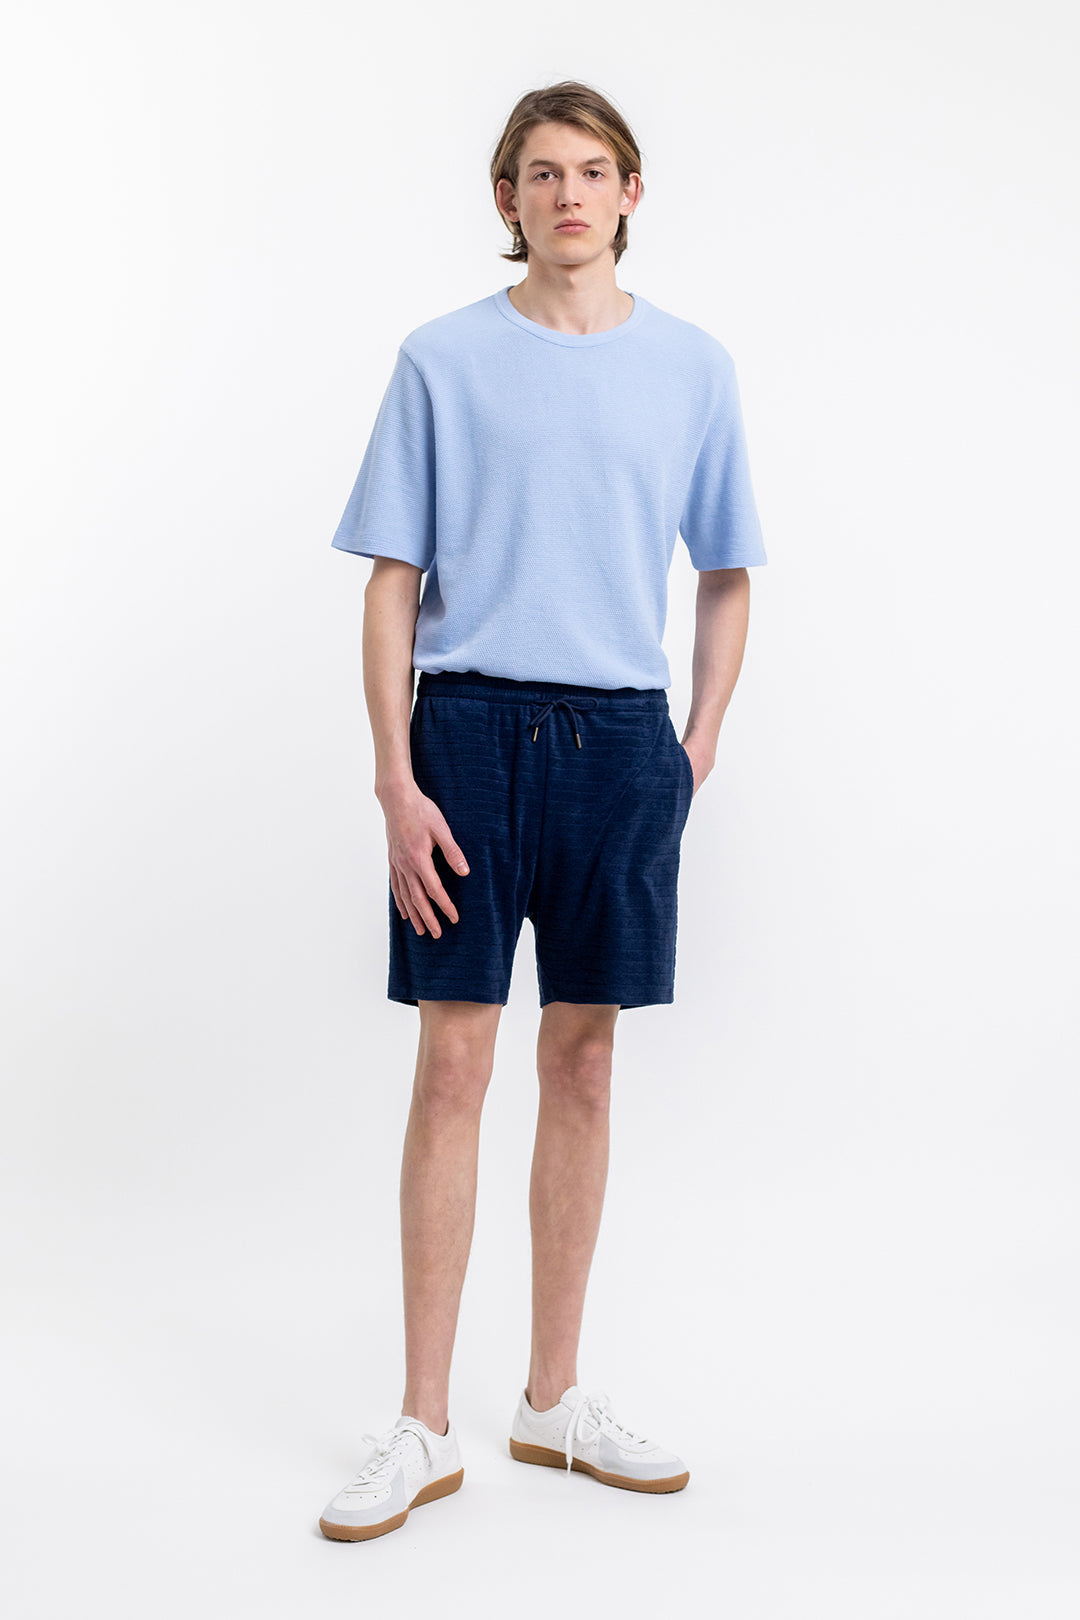 Dark blue sweat shorts made from 100% organic cotton from Rotholz